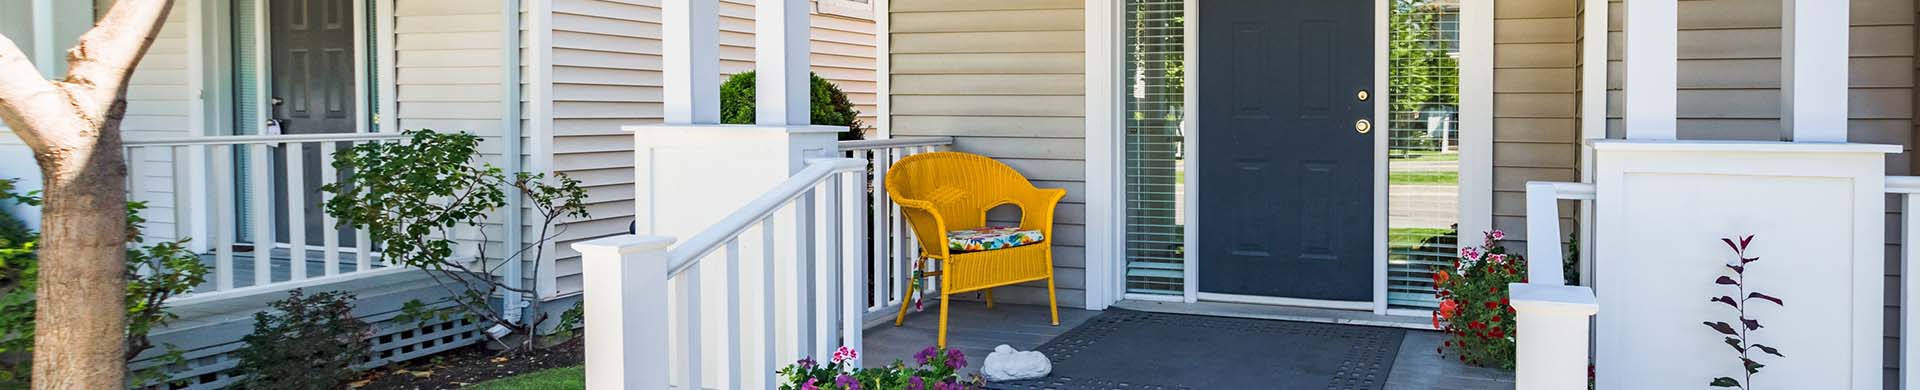 White Front Porch Decorated With Potted Plants